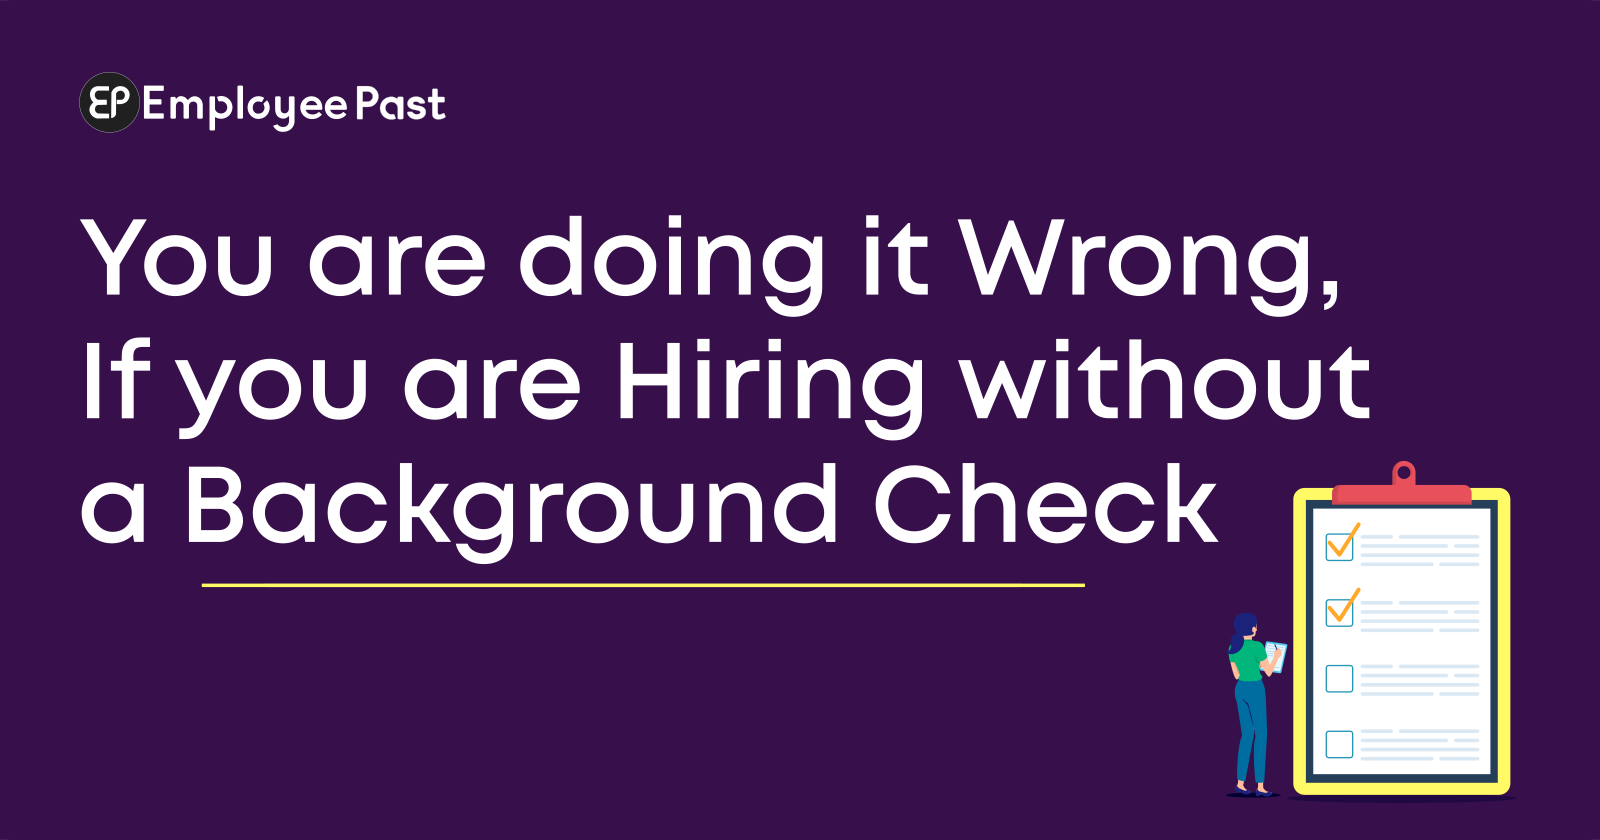 You are doing it Wrong, If you are Hiring without a Background Check